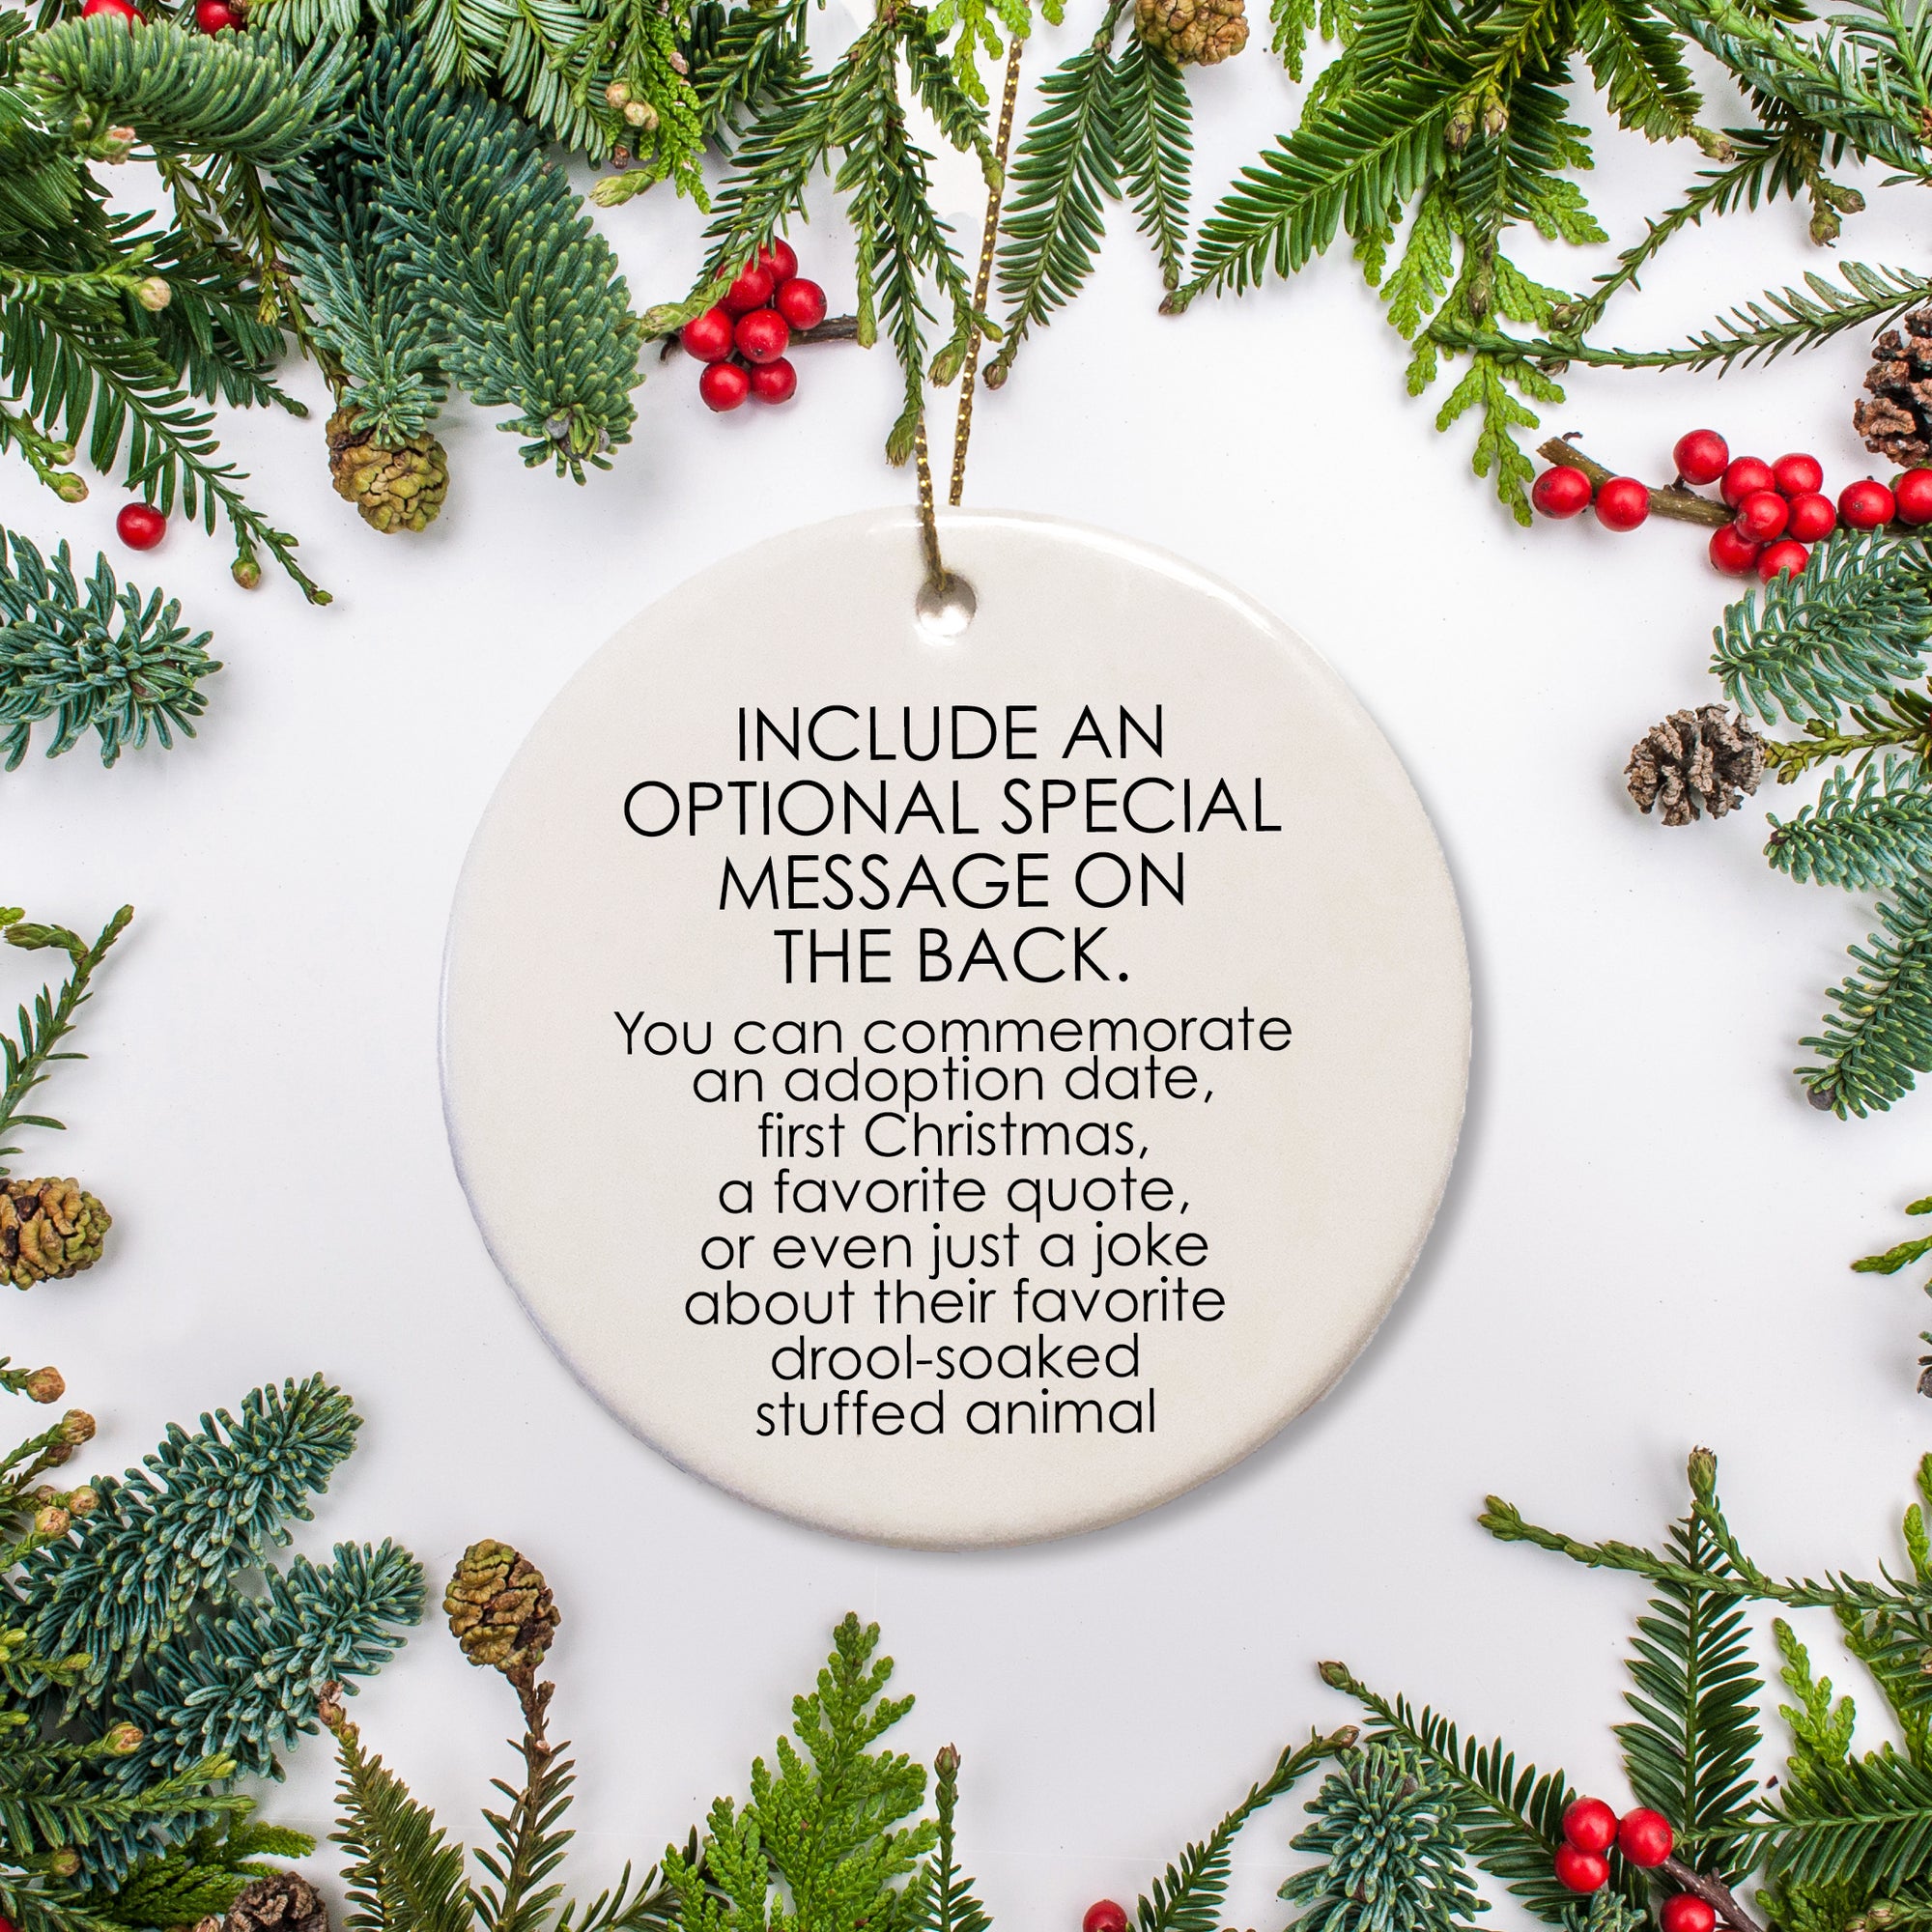 We can print a custom message on the back of your pet dog ornament - commemorating a first christmas, adoption date, favorite toys or activities